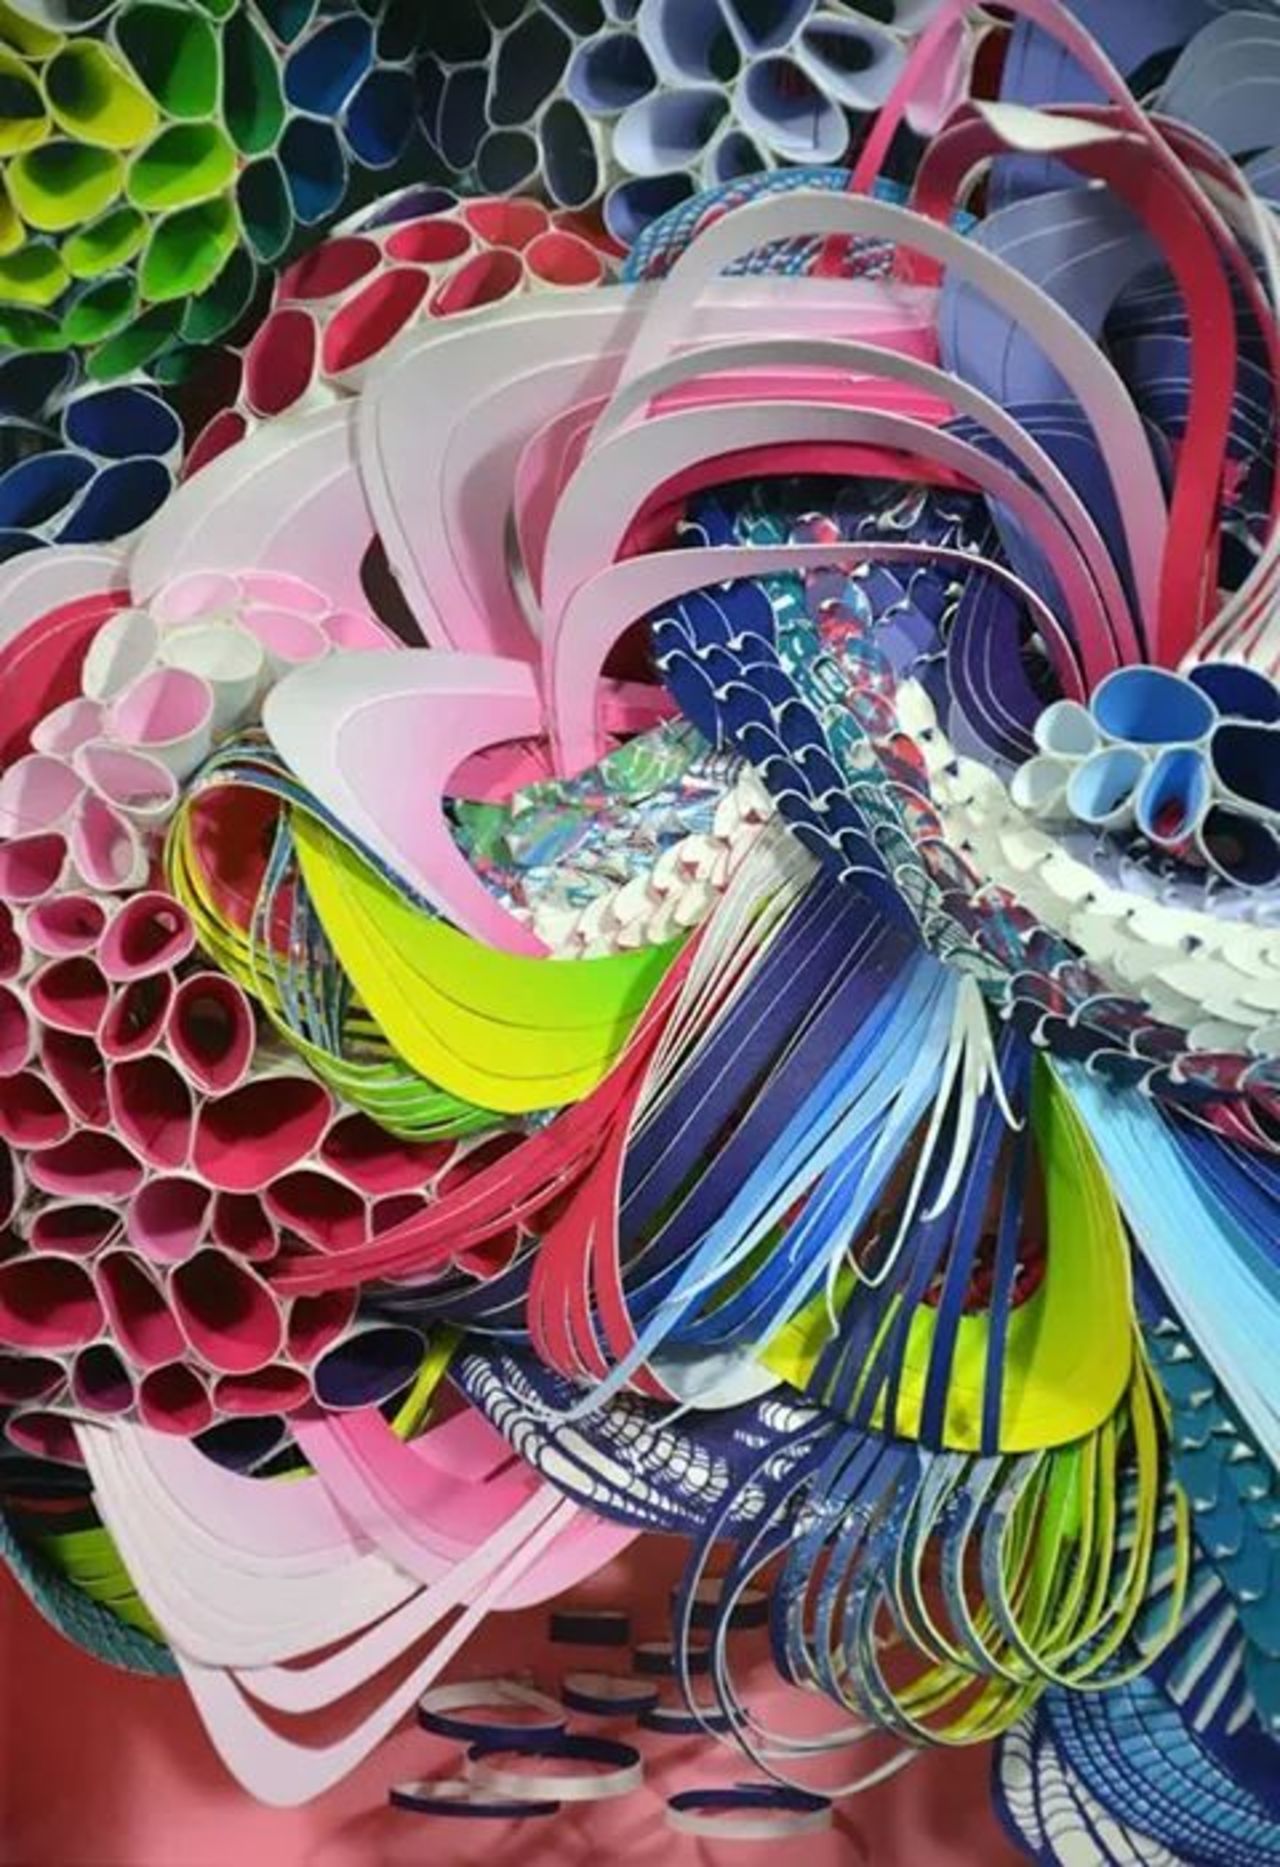 #Art #Picture - Large Paper Installations by Crystal Wagner. http://t.co/D45PZoJECe